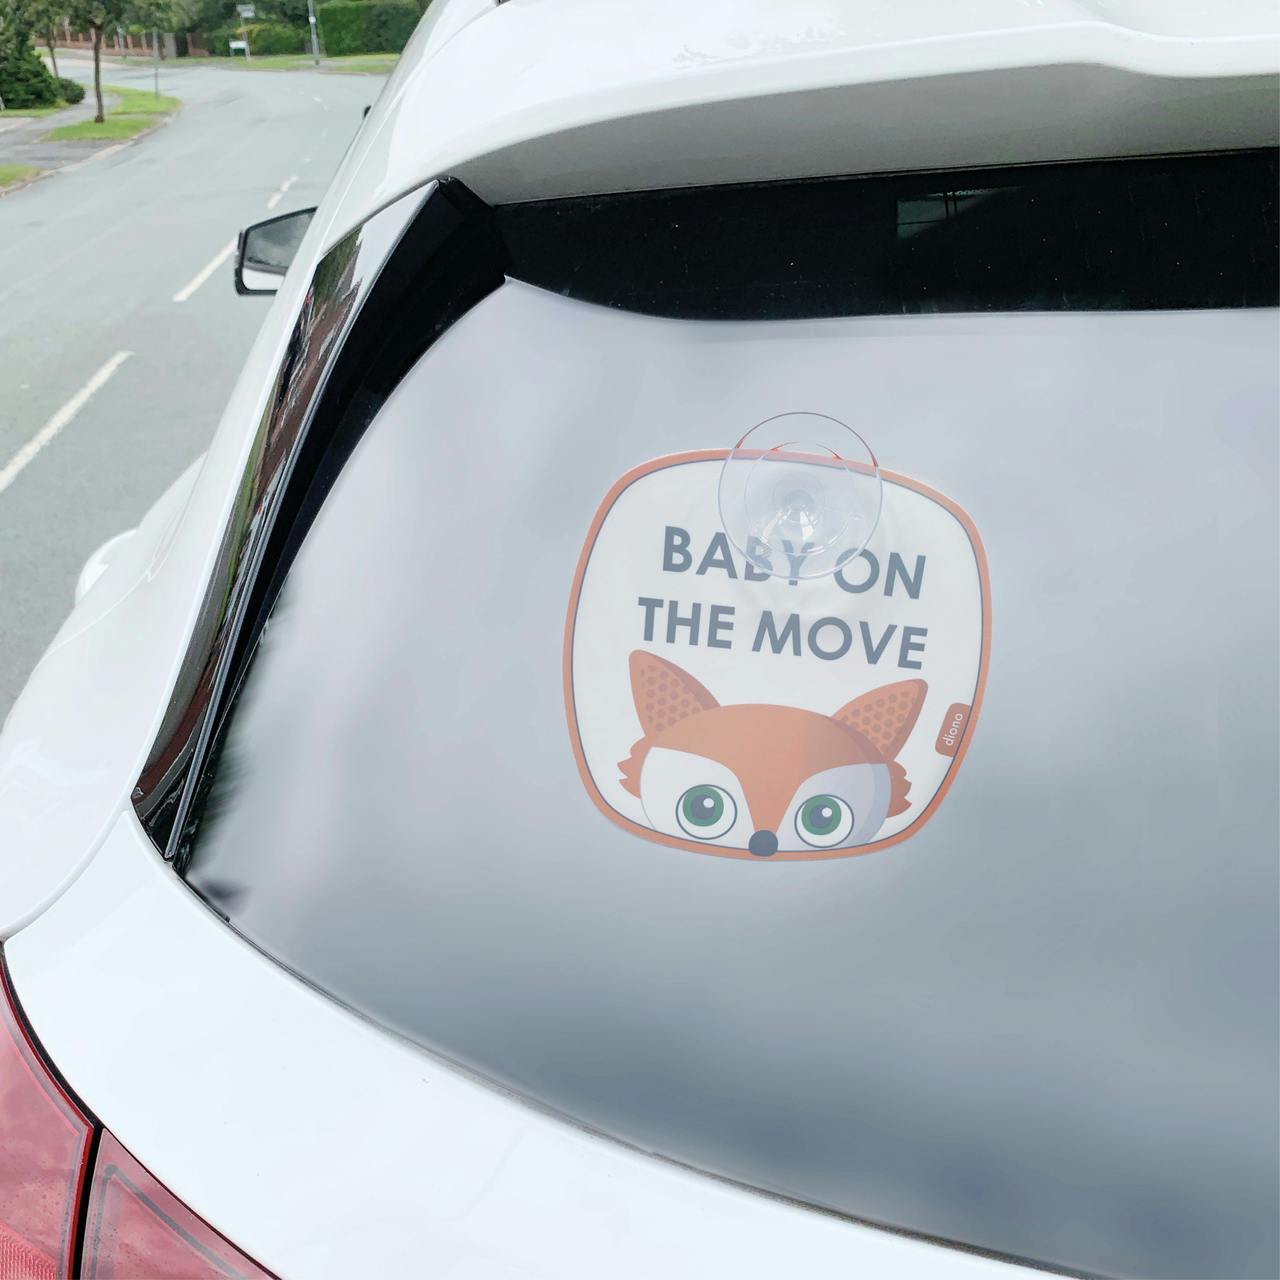 Diono Baby on the Move Signs - 2 Pack